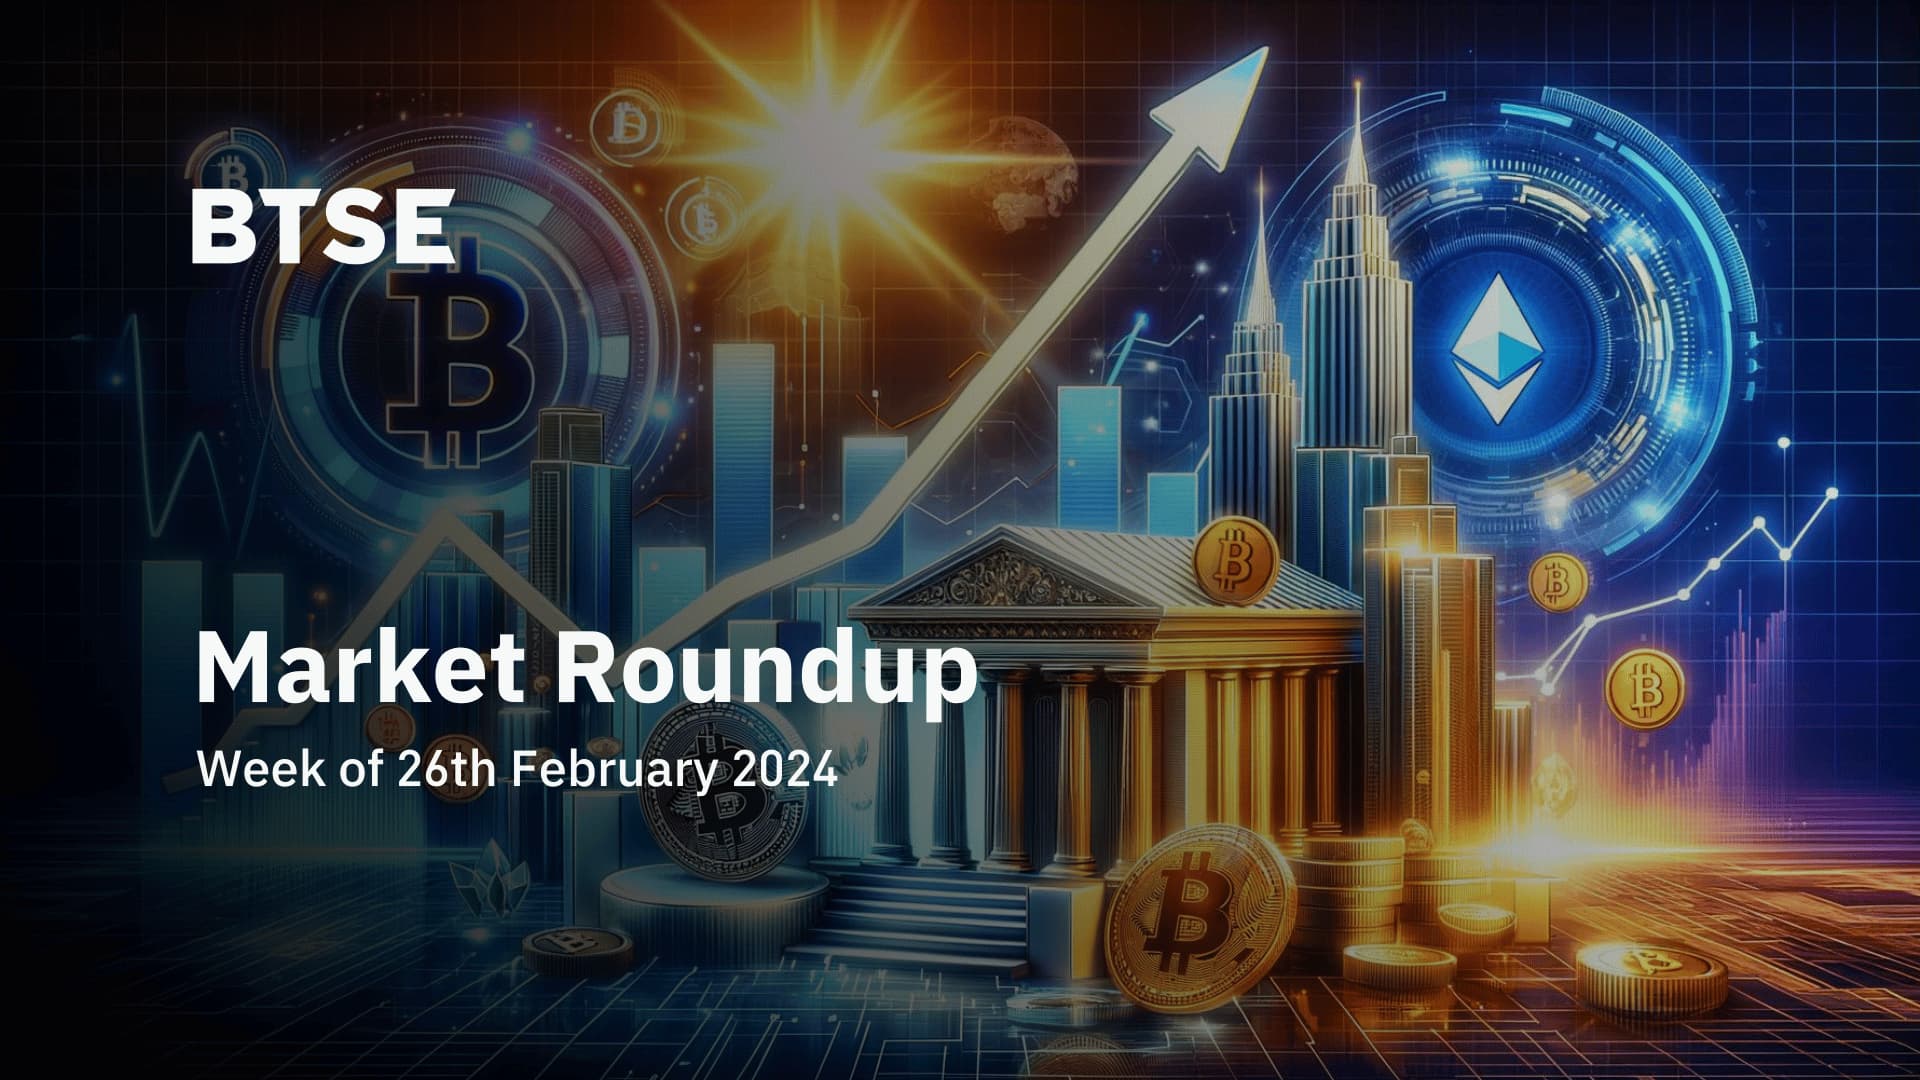 Market Roundup: Bitcoin Rallies to $64K, American Banks Offer Bitcoin ETFs, and Blast Launches Mainnet